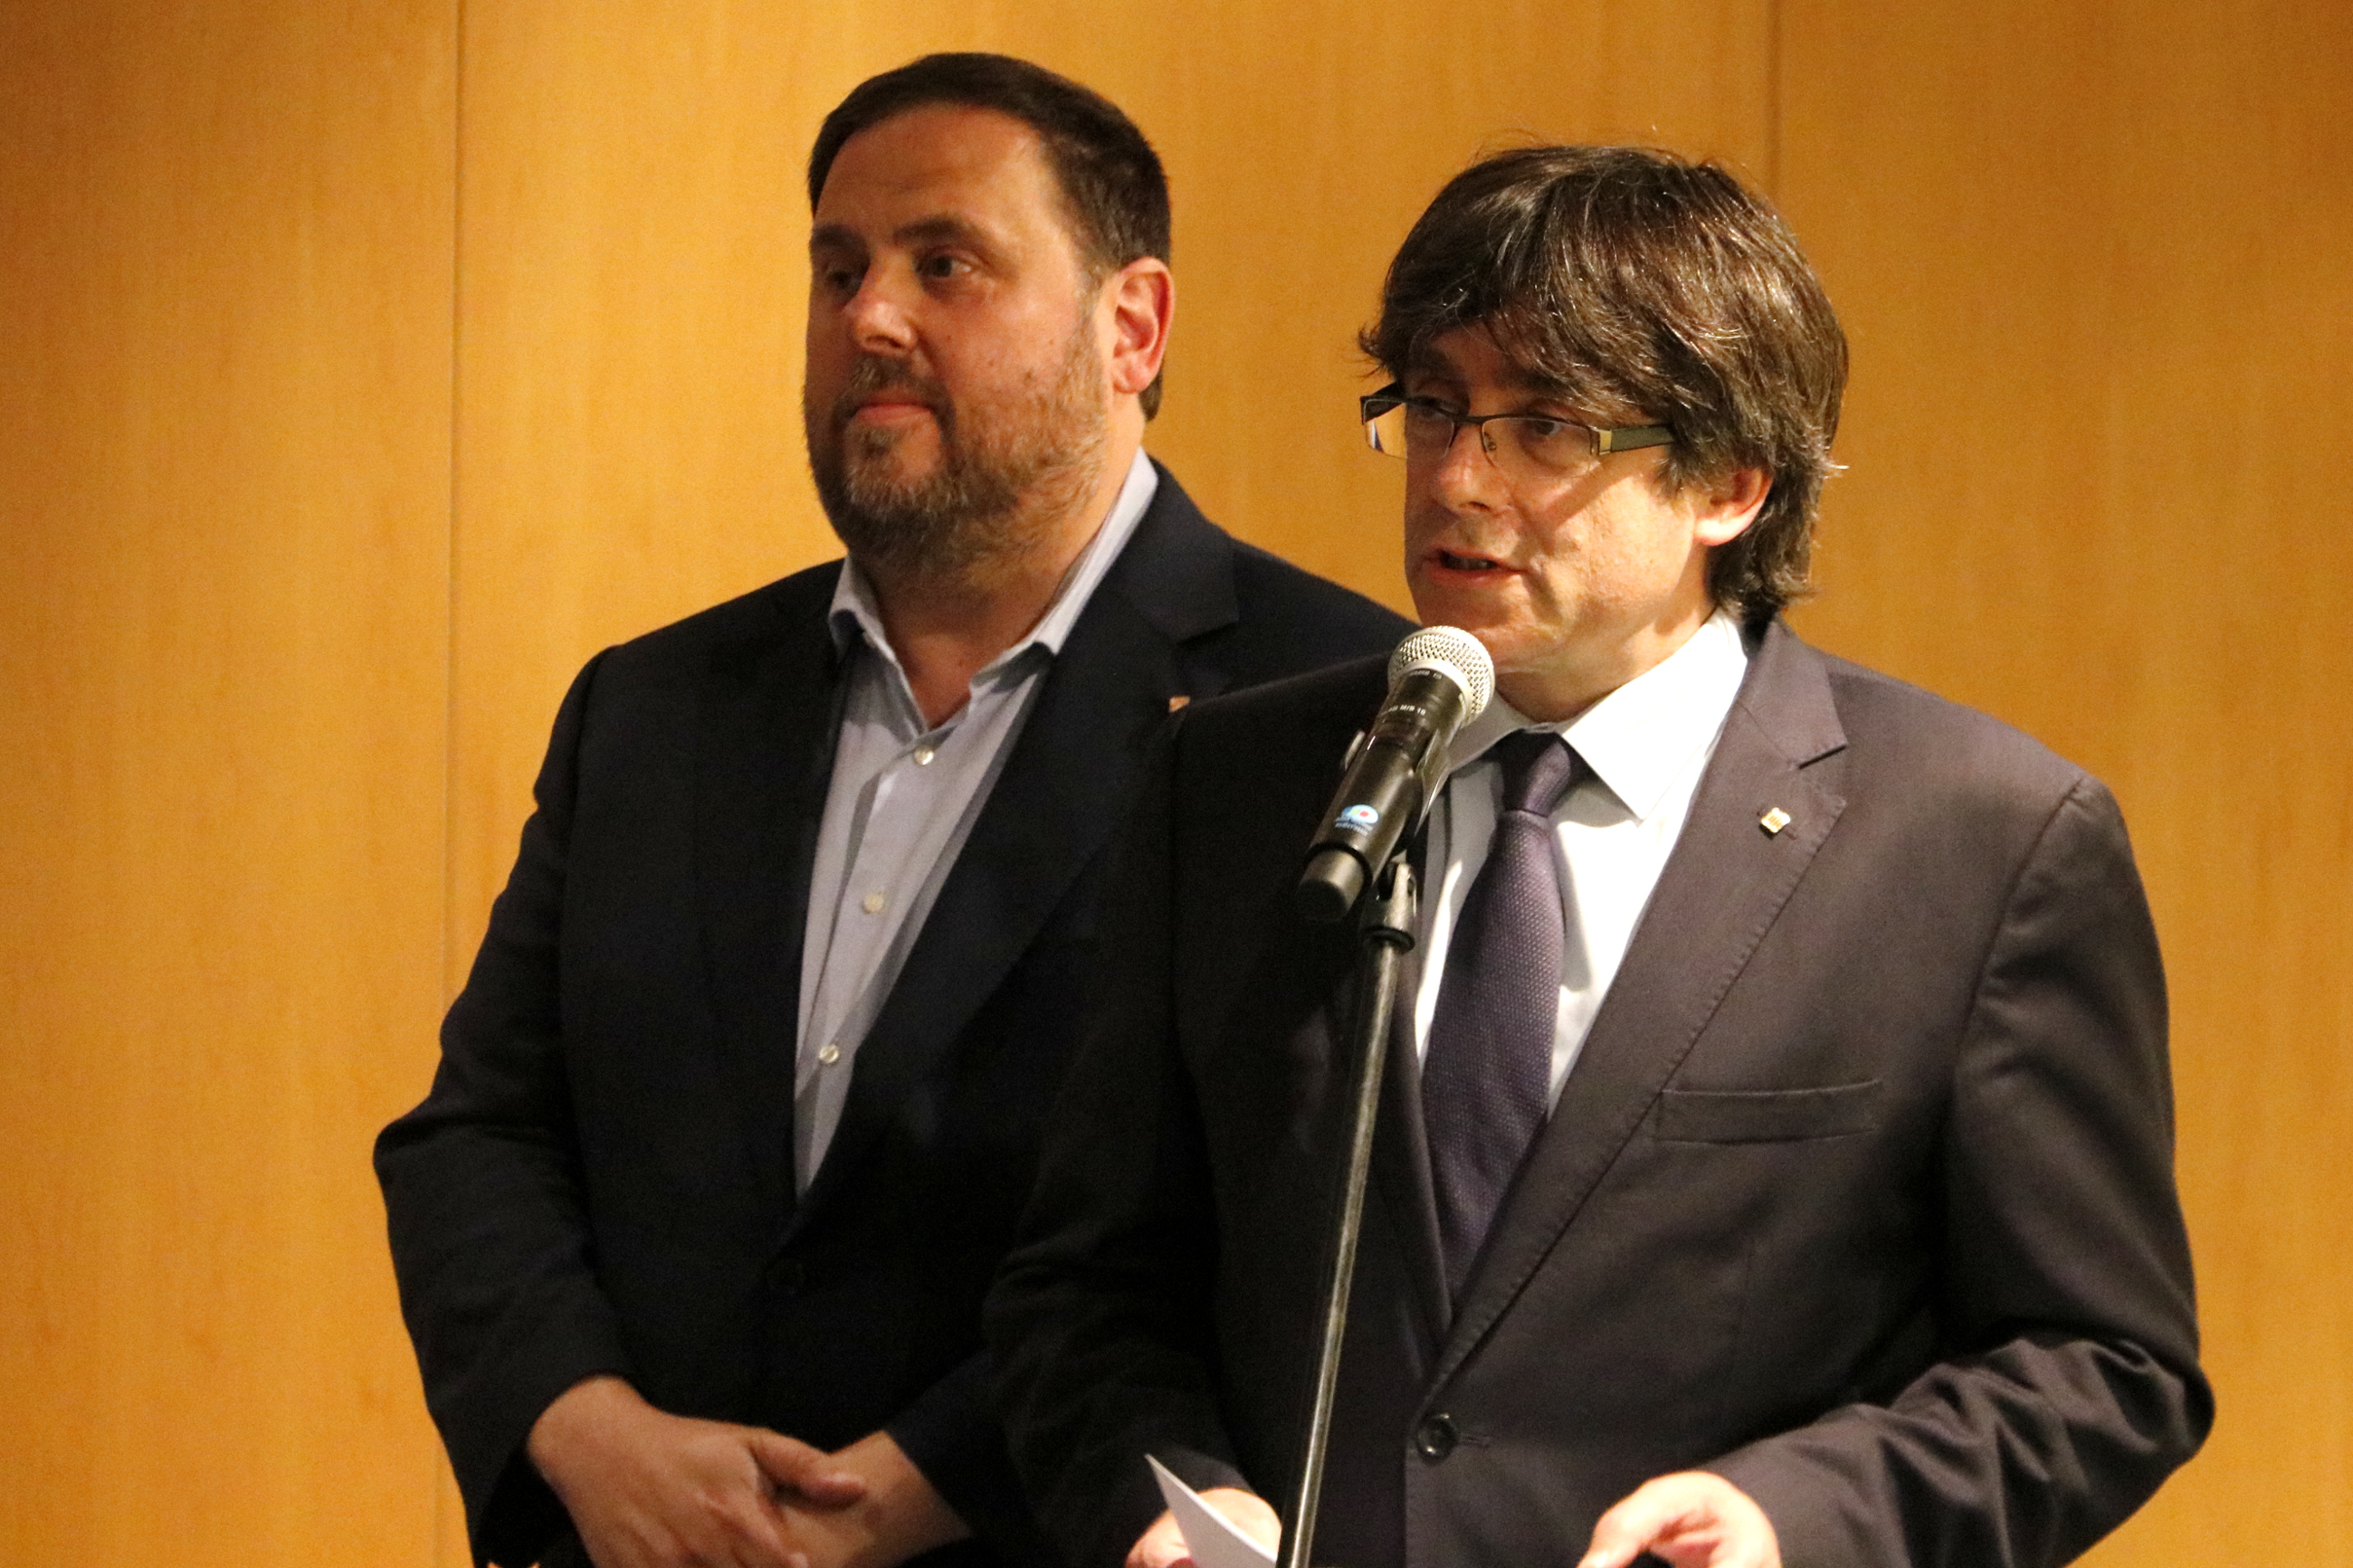 Catalan president, Carles Puigedemont, and vice president, Oriol Junqueras, at an event for a referendum in Barcelona (by Rafa Garrido) 